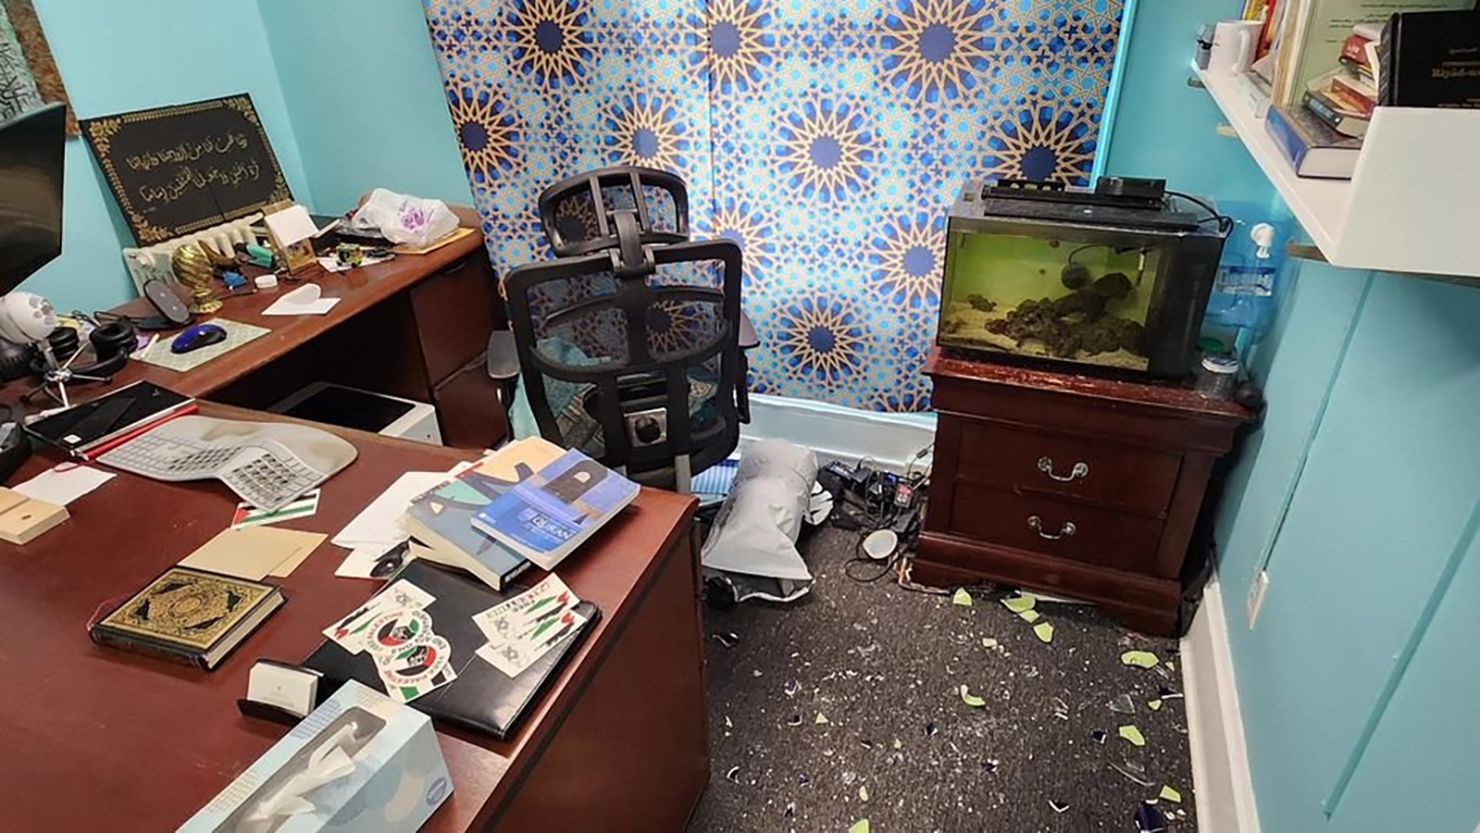 The CILRU chairwoman said vandalism included shattered windows, vandalized TVs, broken printers, smashed art work and the destruction of a Palestinian flag.